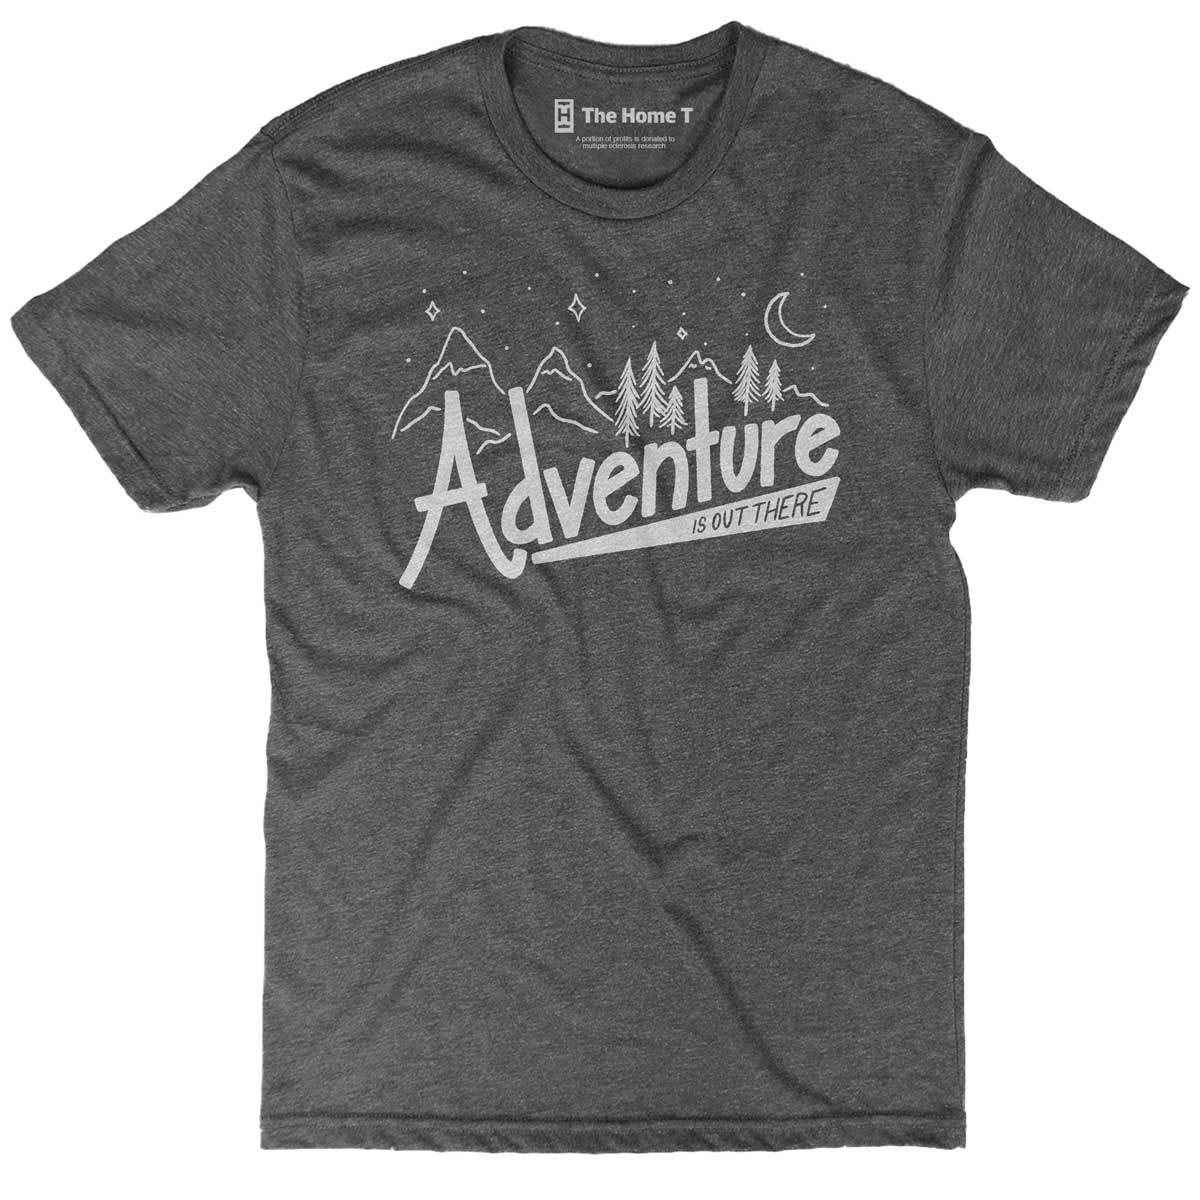 Adventure Is Out There Crew neck The Home T XXL Grey